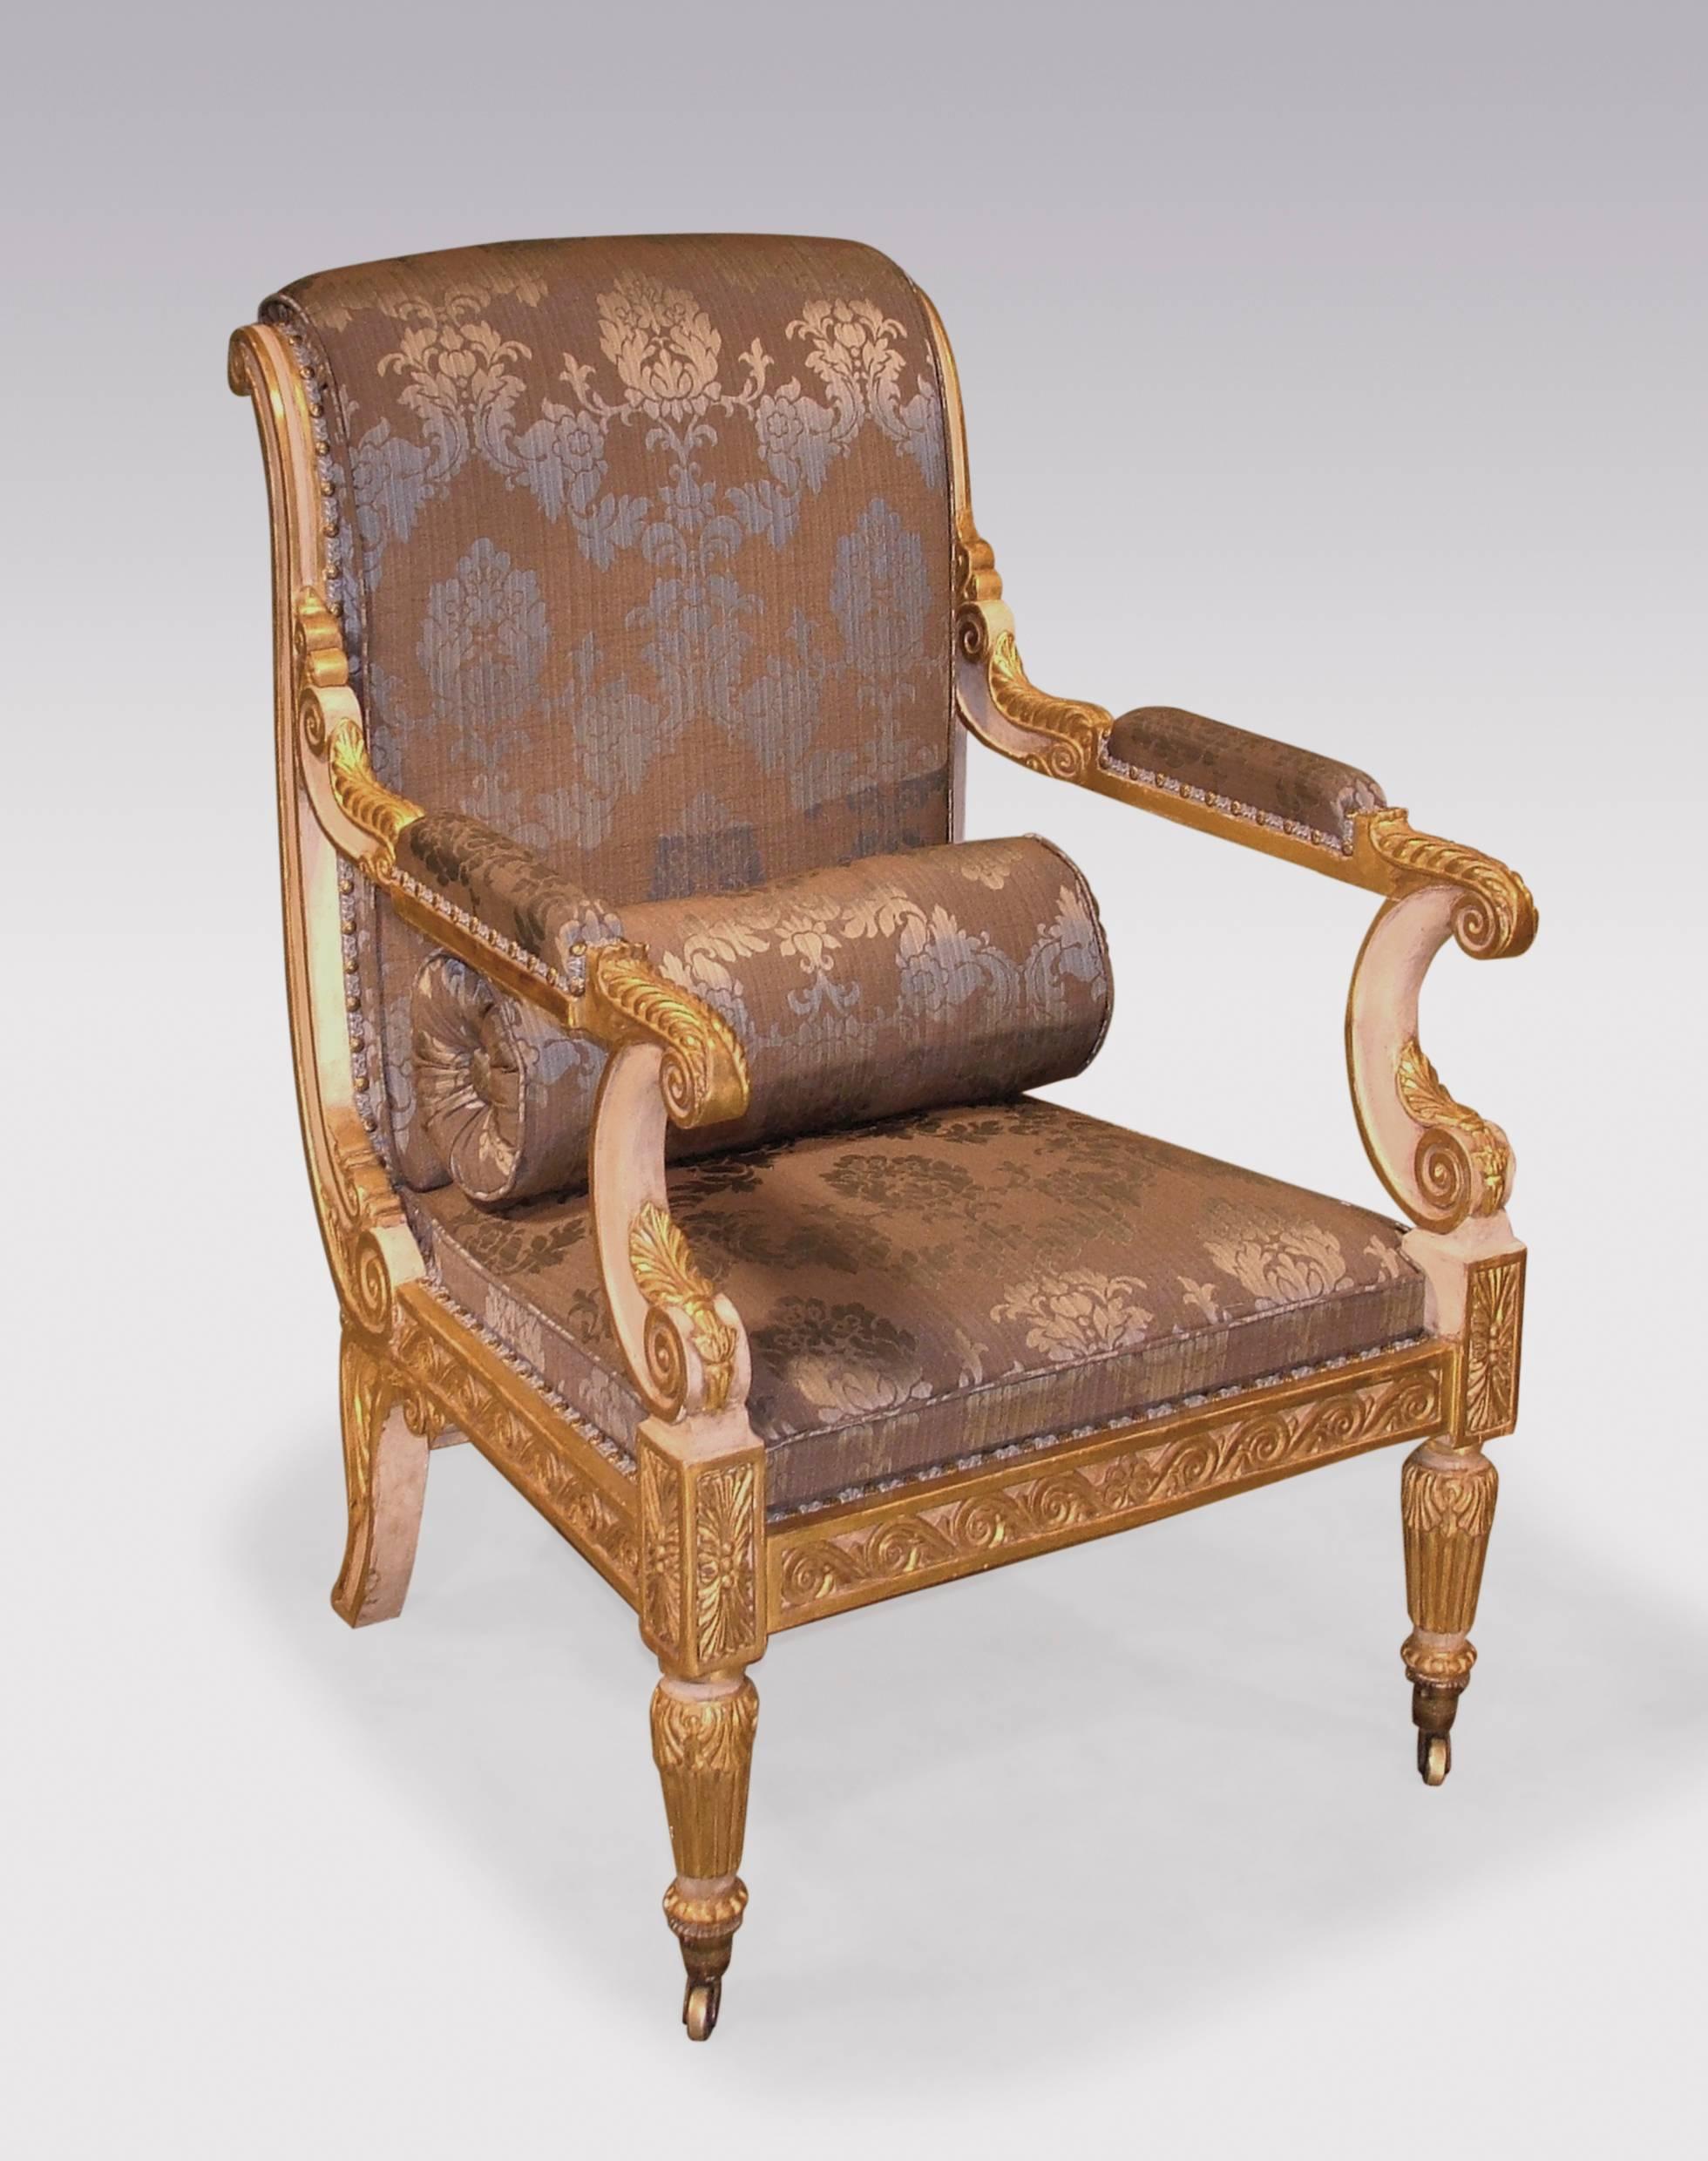 An impressive pair of early 19th century Regency period white painted and carved giltwood armchairs, in the manner of Morel and Hughes, acanthus and scroll carved throughout. The chairs with roll-over backs and stuff-over seats, above Vitruvian